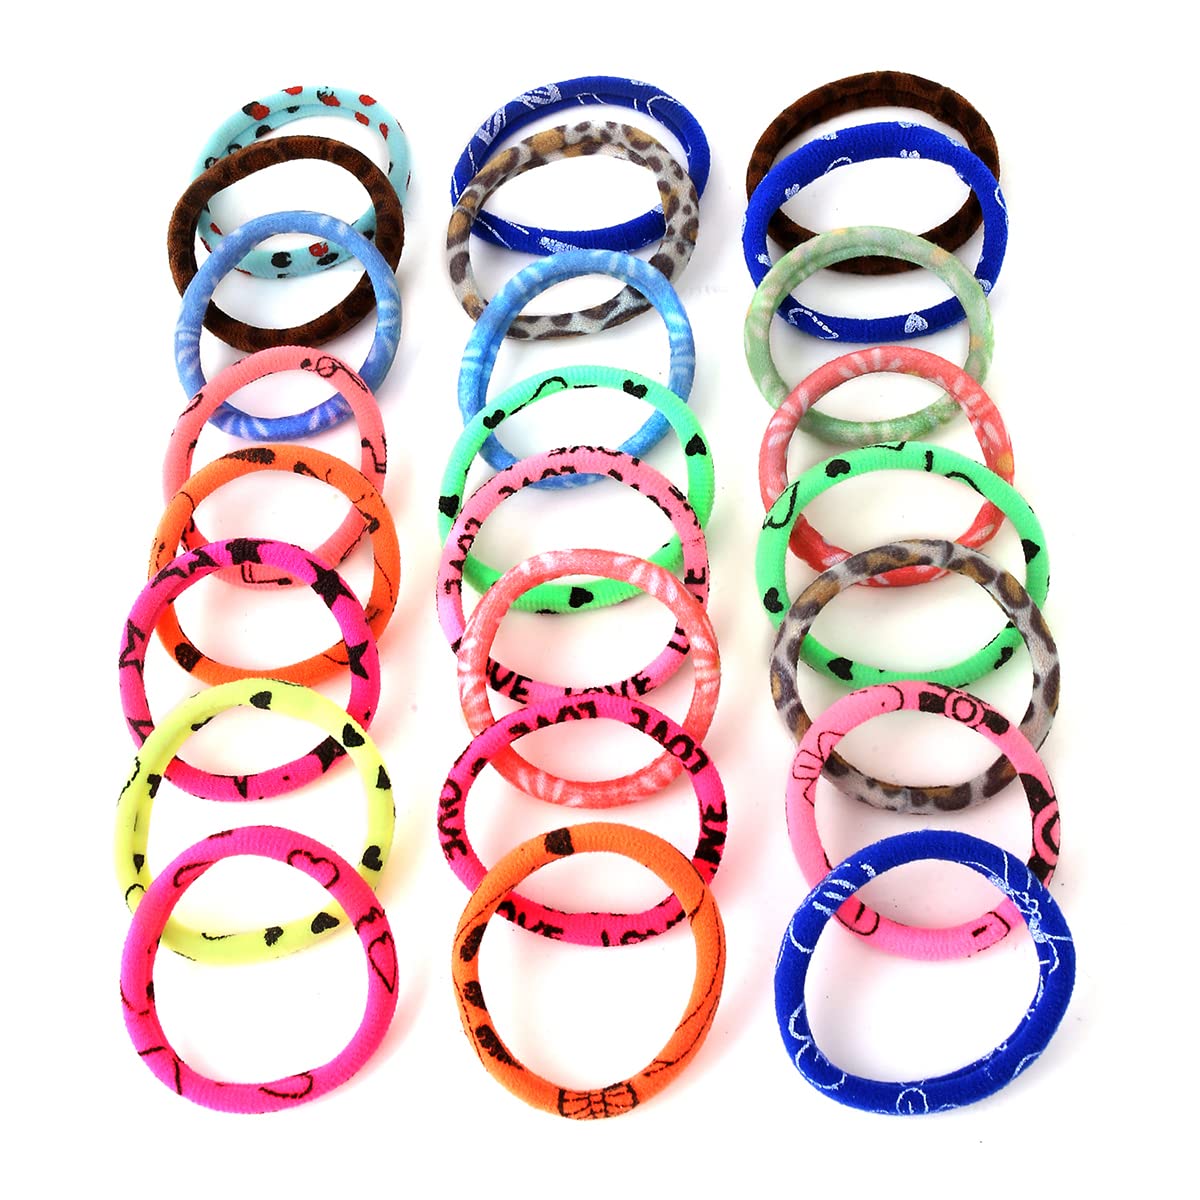 Amazoncom Zugar Land Colorful Rainbow Stretchy Rubber Bracelets 12 Pack  8 Great Kids and Adults Perfect for Party Favors Carnival Prizes Goodie  Bags Fundraisers Giveaways etc 12  Toys  Games